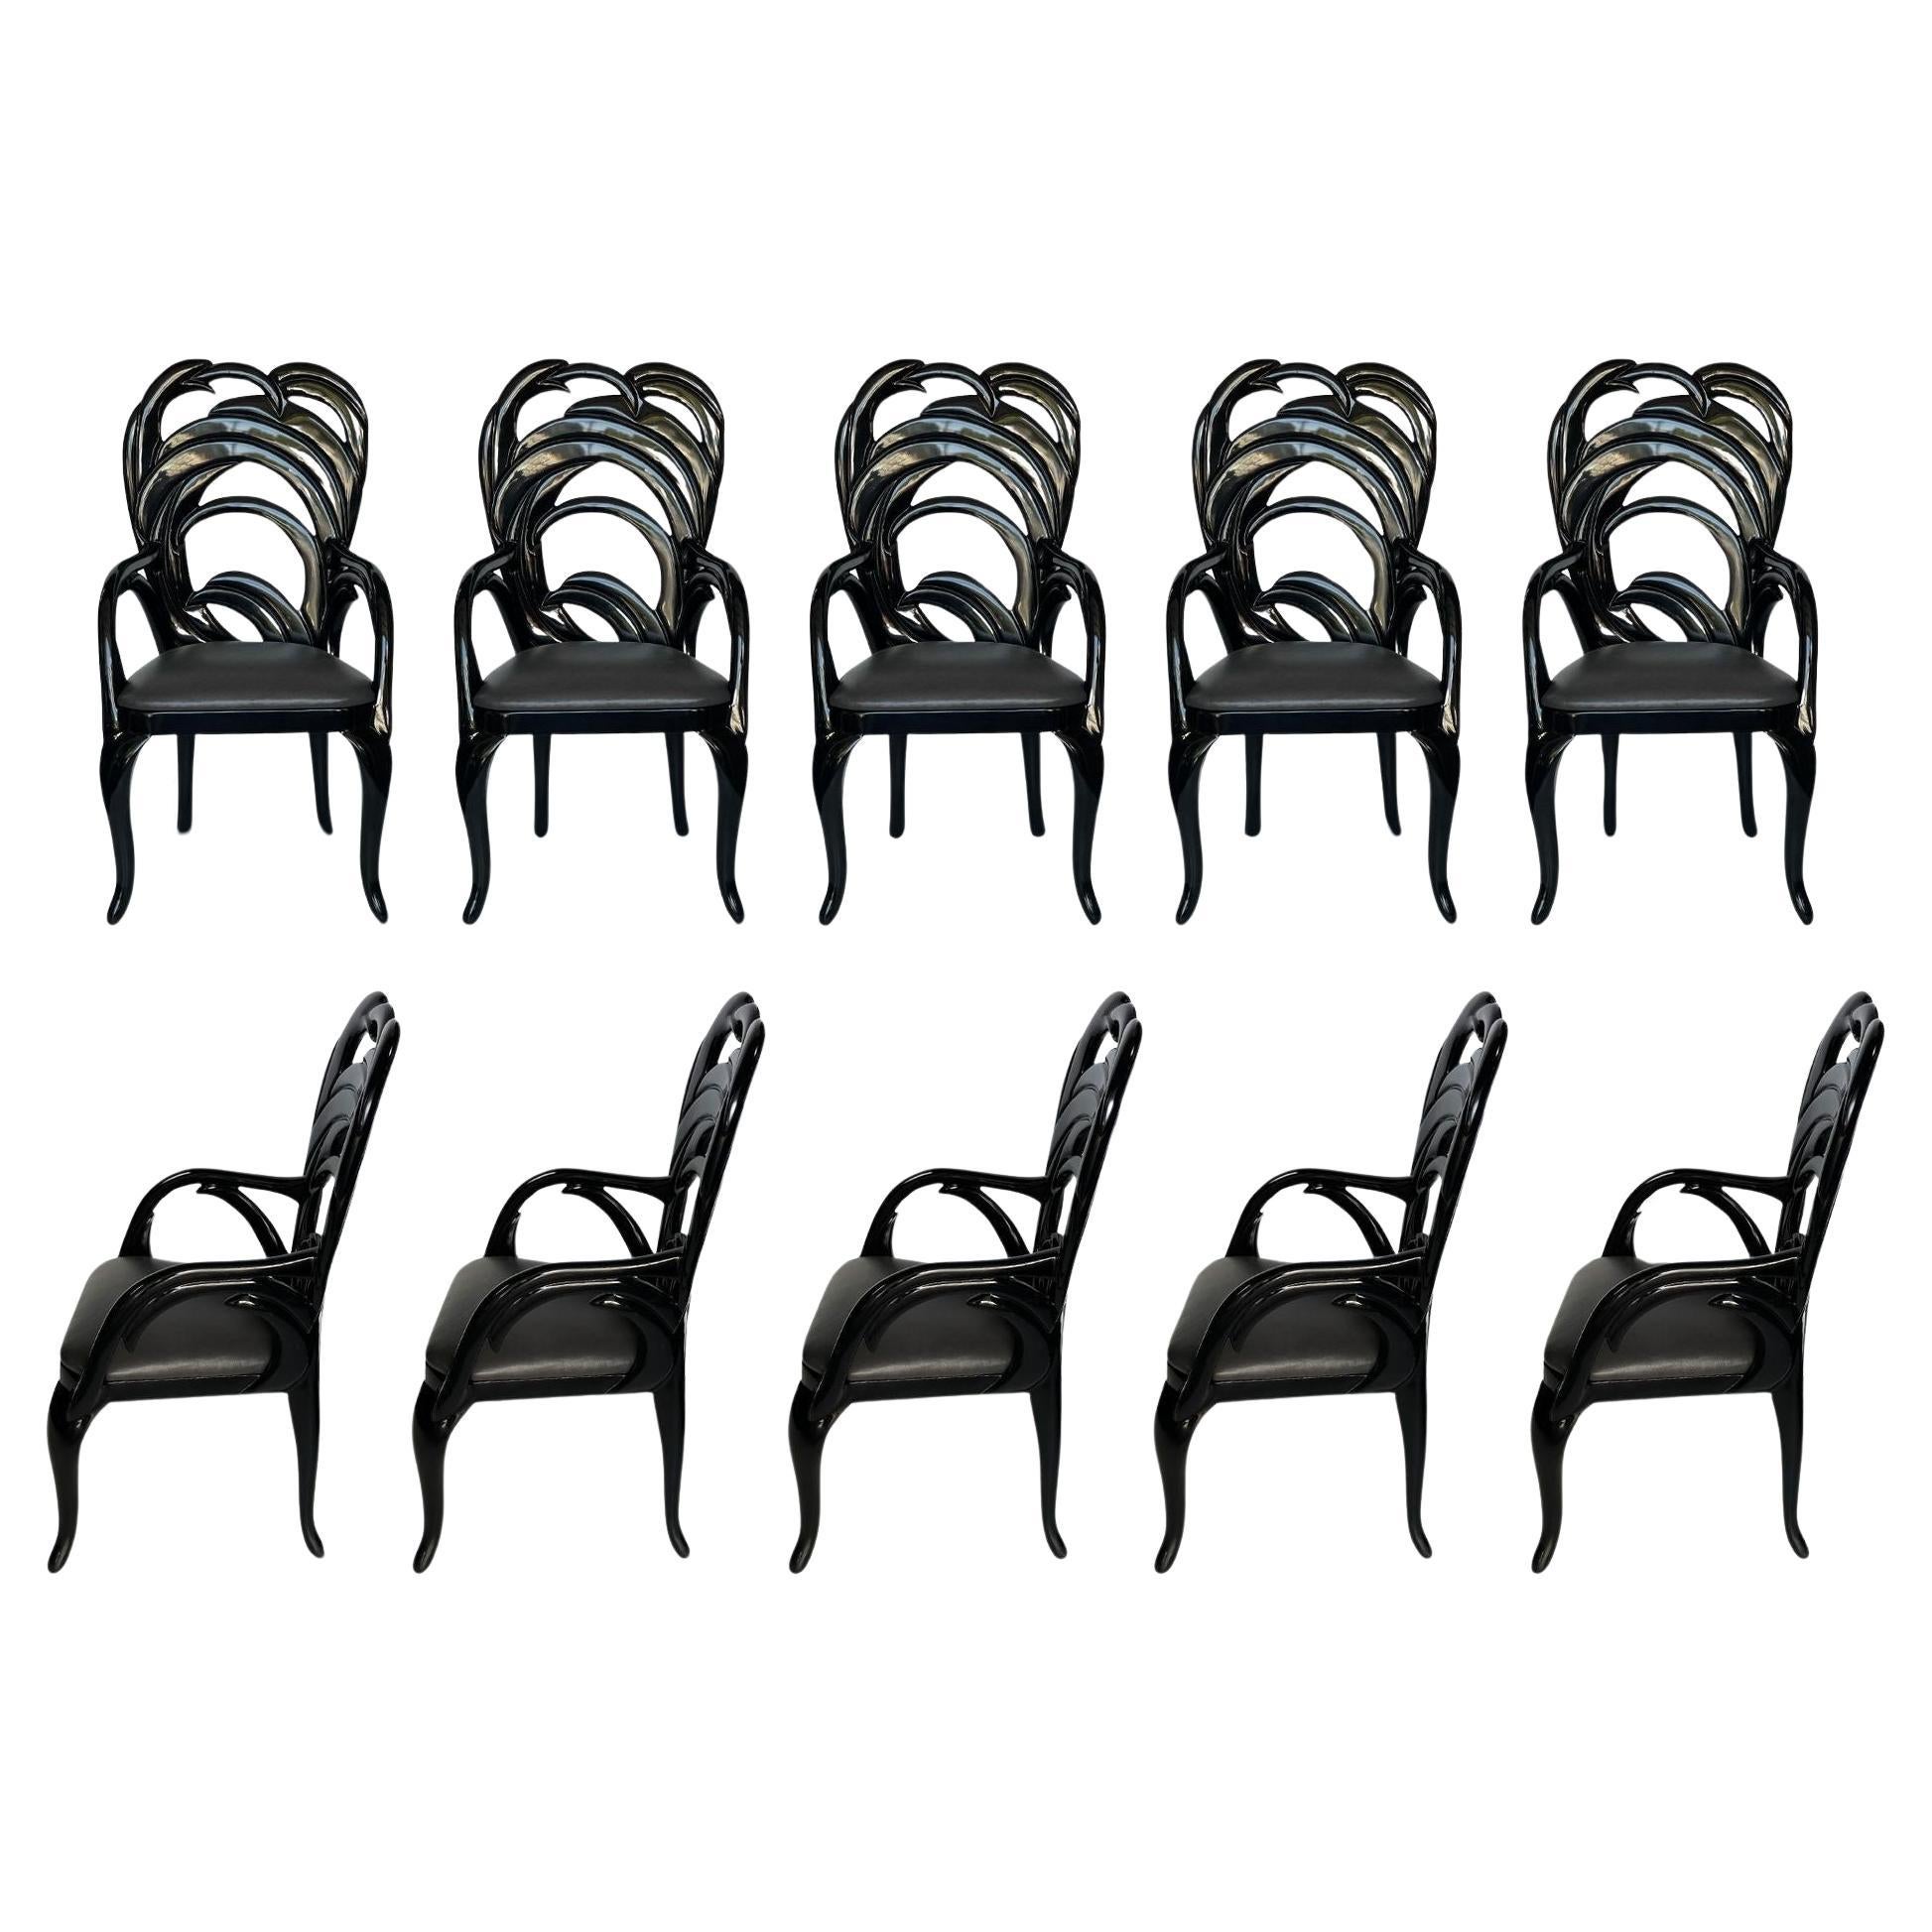 Set of Ten Vintage Carved Wood "Palm Leaf" Chairs by Phyllis Morris, c. 1970's For Sale